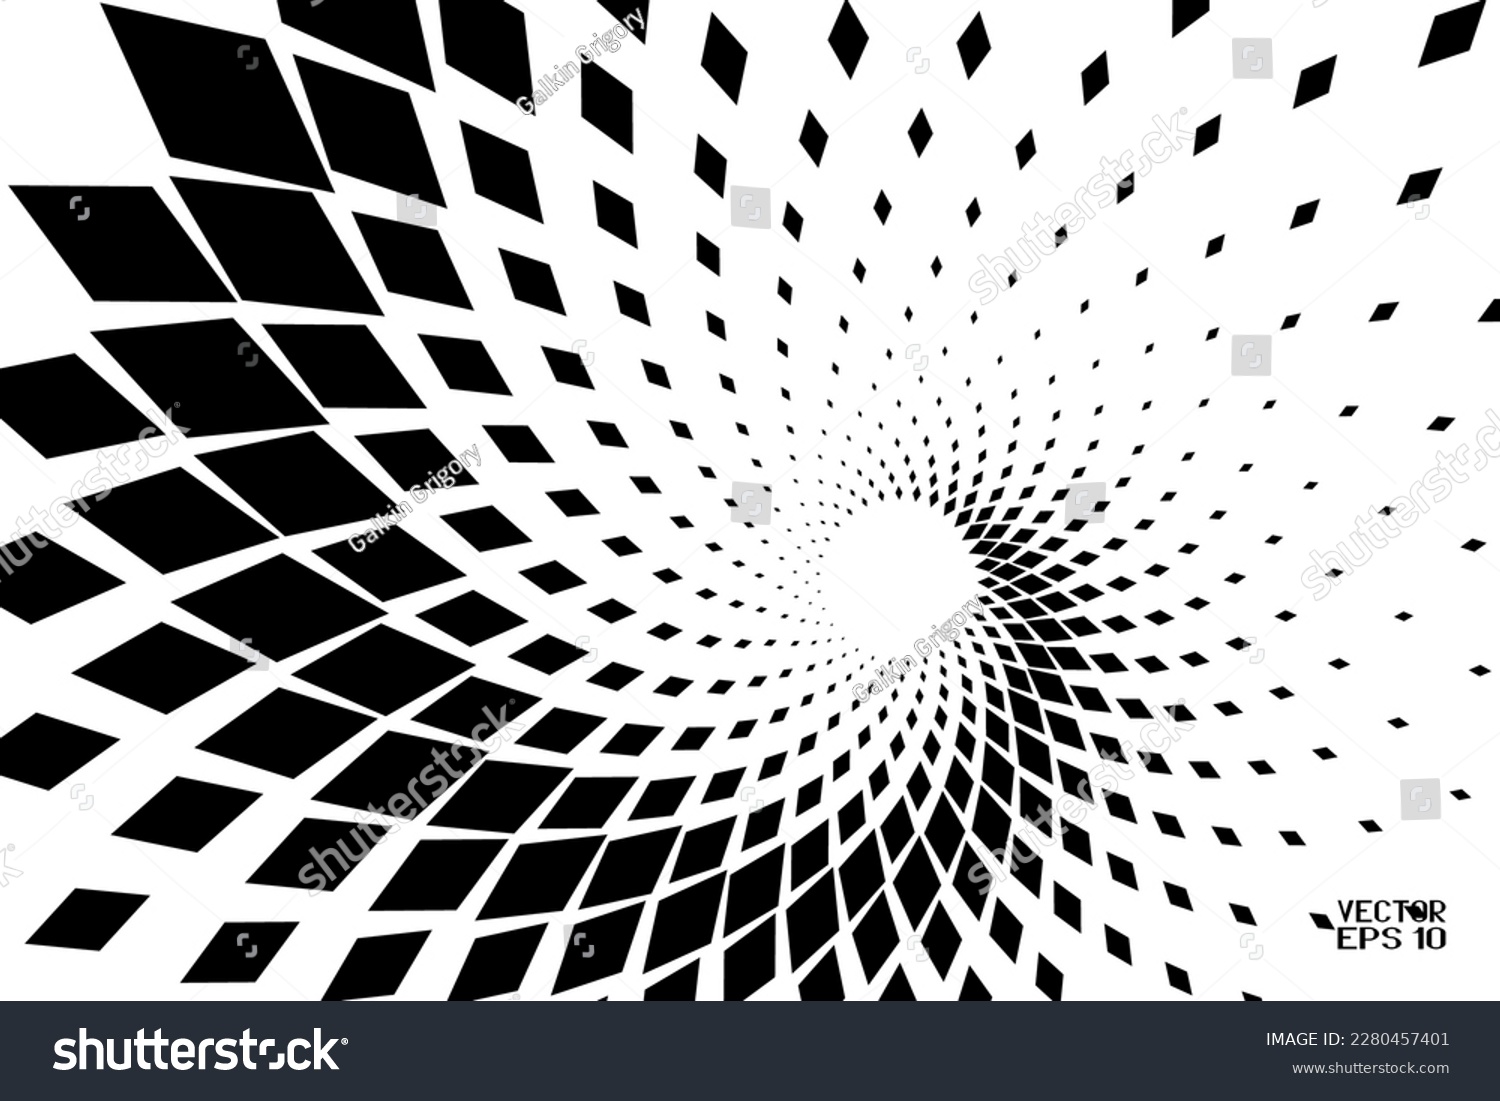 Abstract Black and White Geometric Pattern with Squares. Spiral-like Spotted Tunnel. Contrasty Halftone Optical Psychedelic Illusion. Vector. 3D Illustration #2280457401